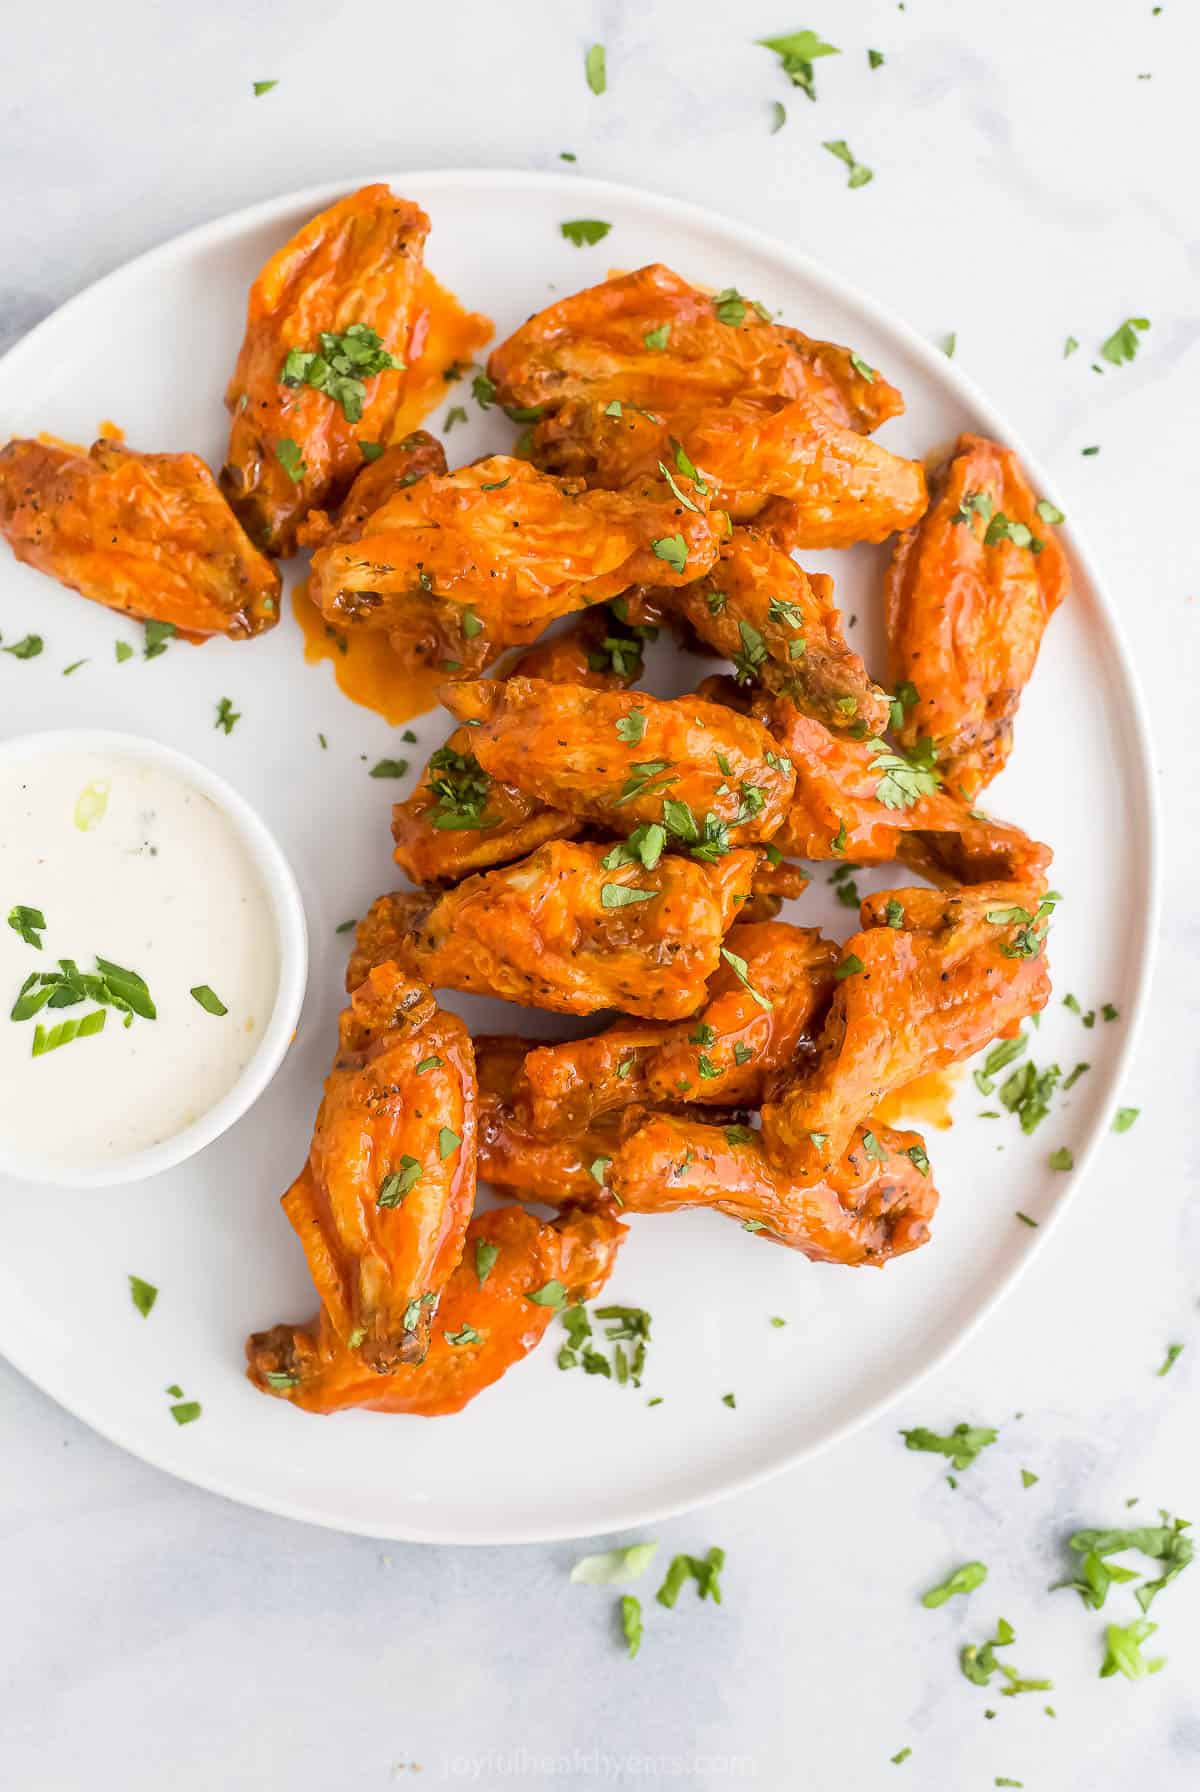 Crispy chicken wings coated in a spicy sauce on a white plate with ranch dressing